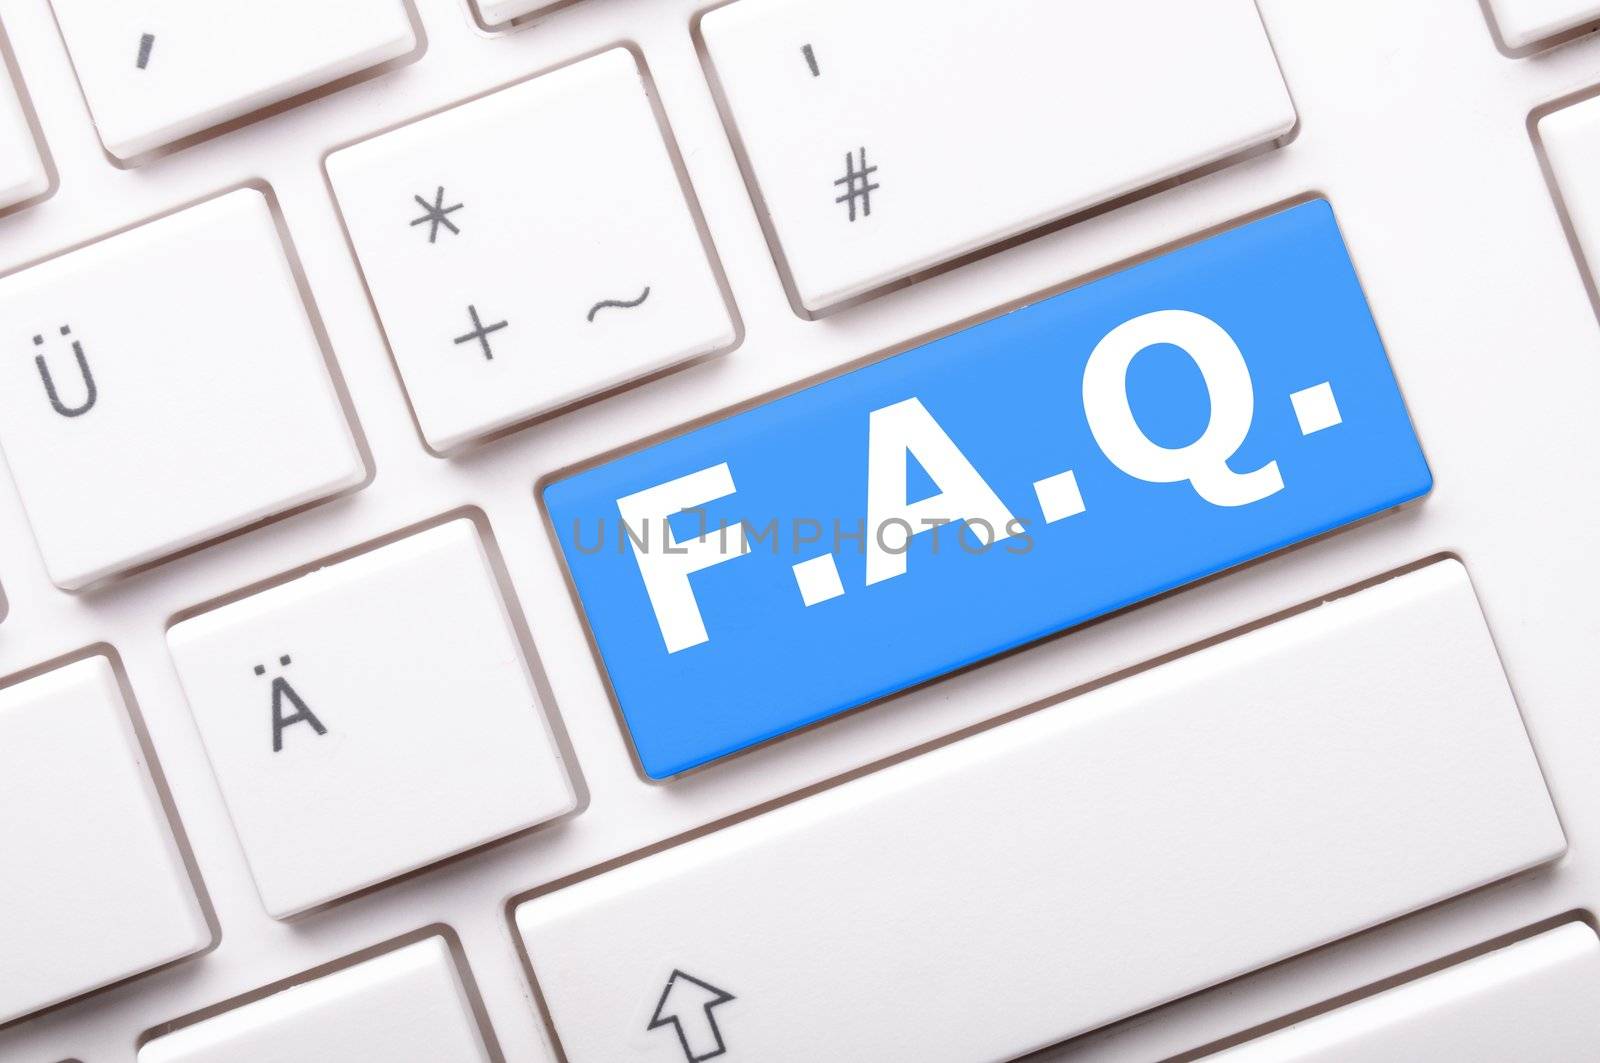 faq frequently asked questions key on computer keyboard